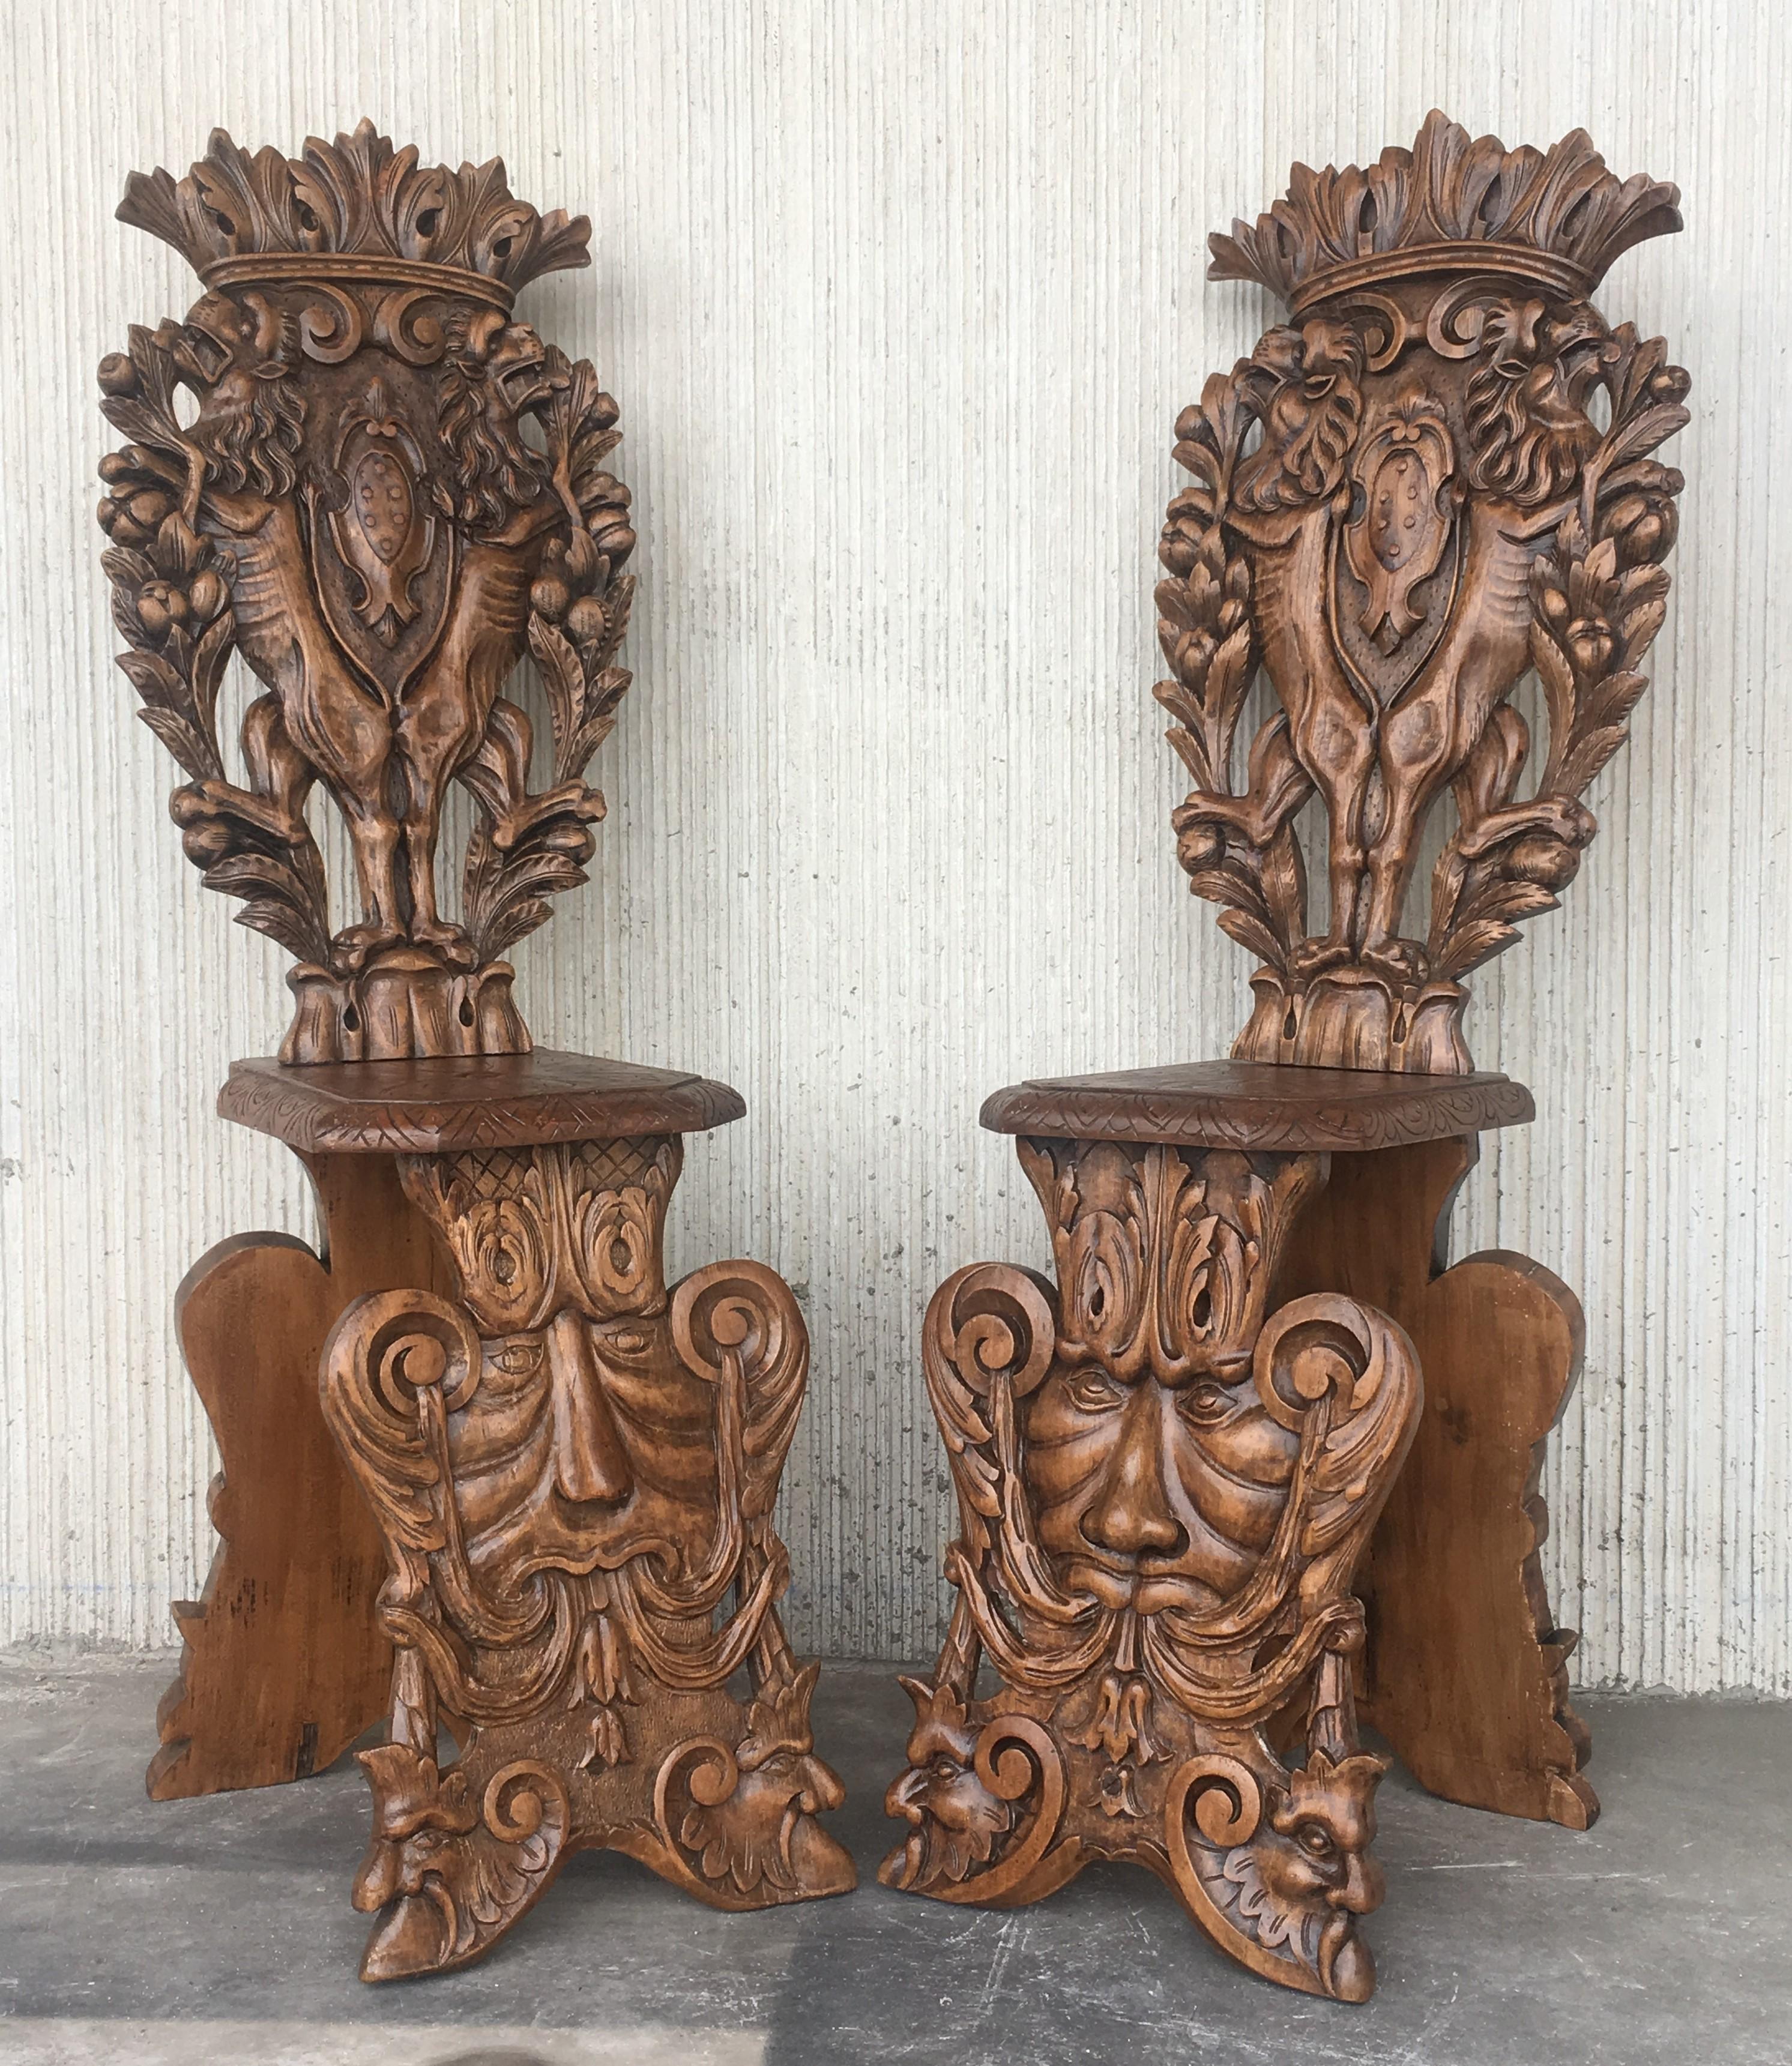 Pair of 18th Century Italian Renaissance Lion Carved Walnut Sgabello Hall Chairs In Excellent Condition For Sale In Miami, FL